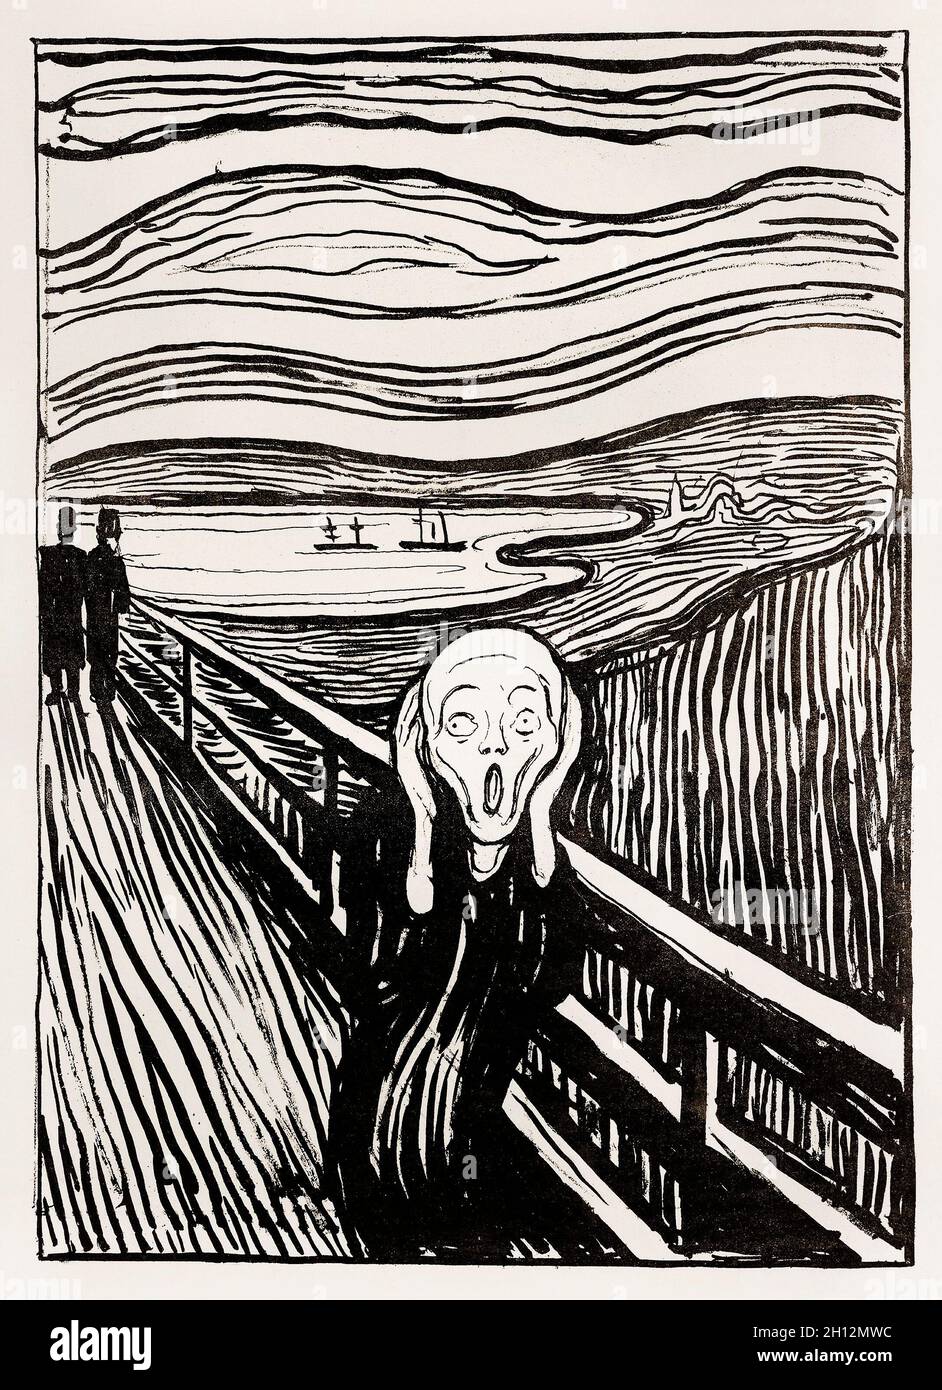 One of numerous versions of The Scream (1895) by Edvard Munch. Stock Photo